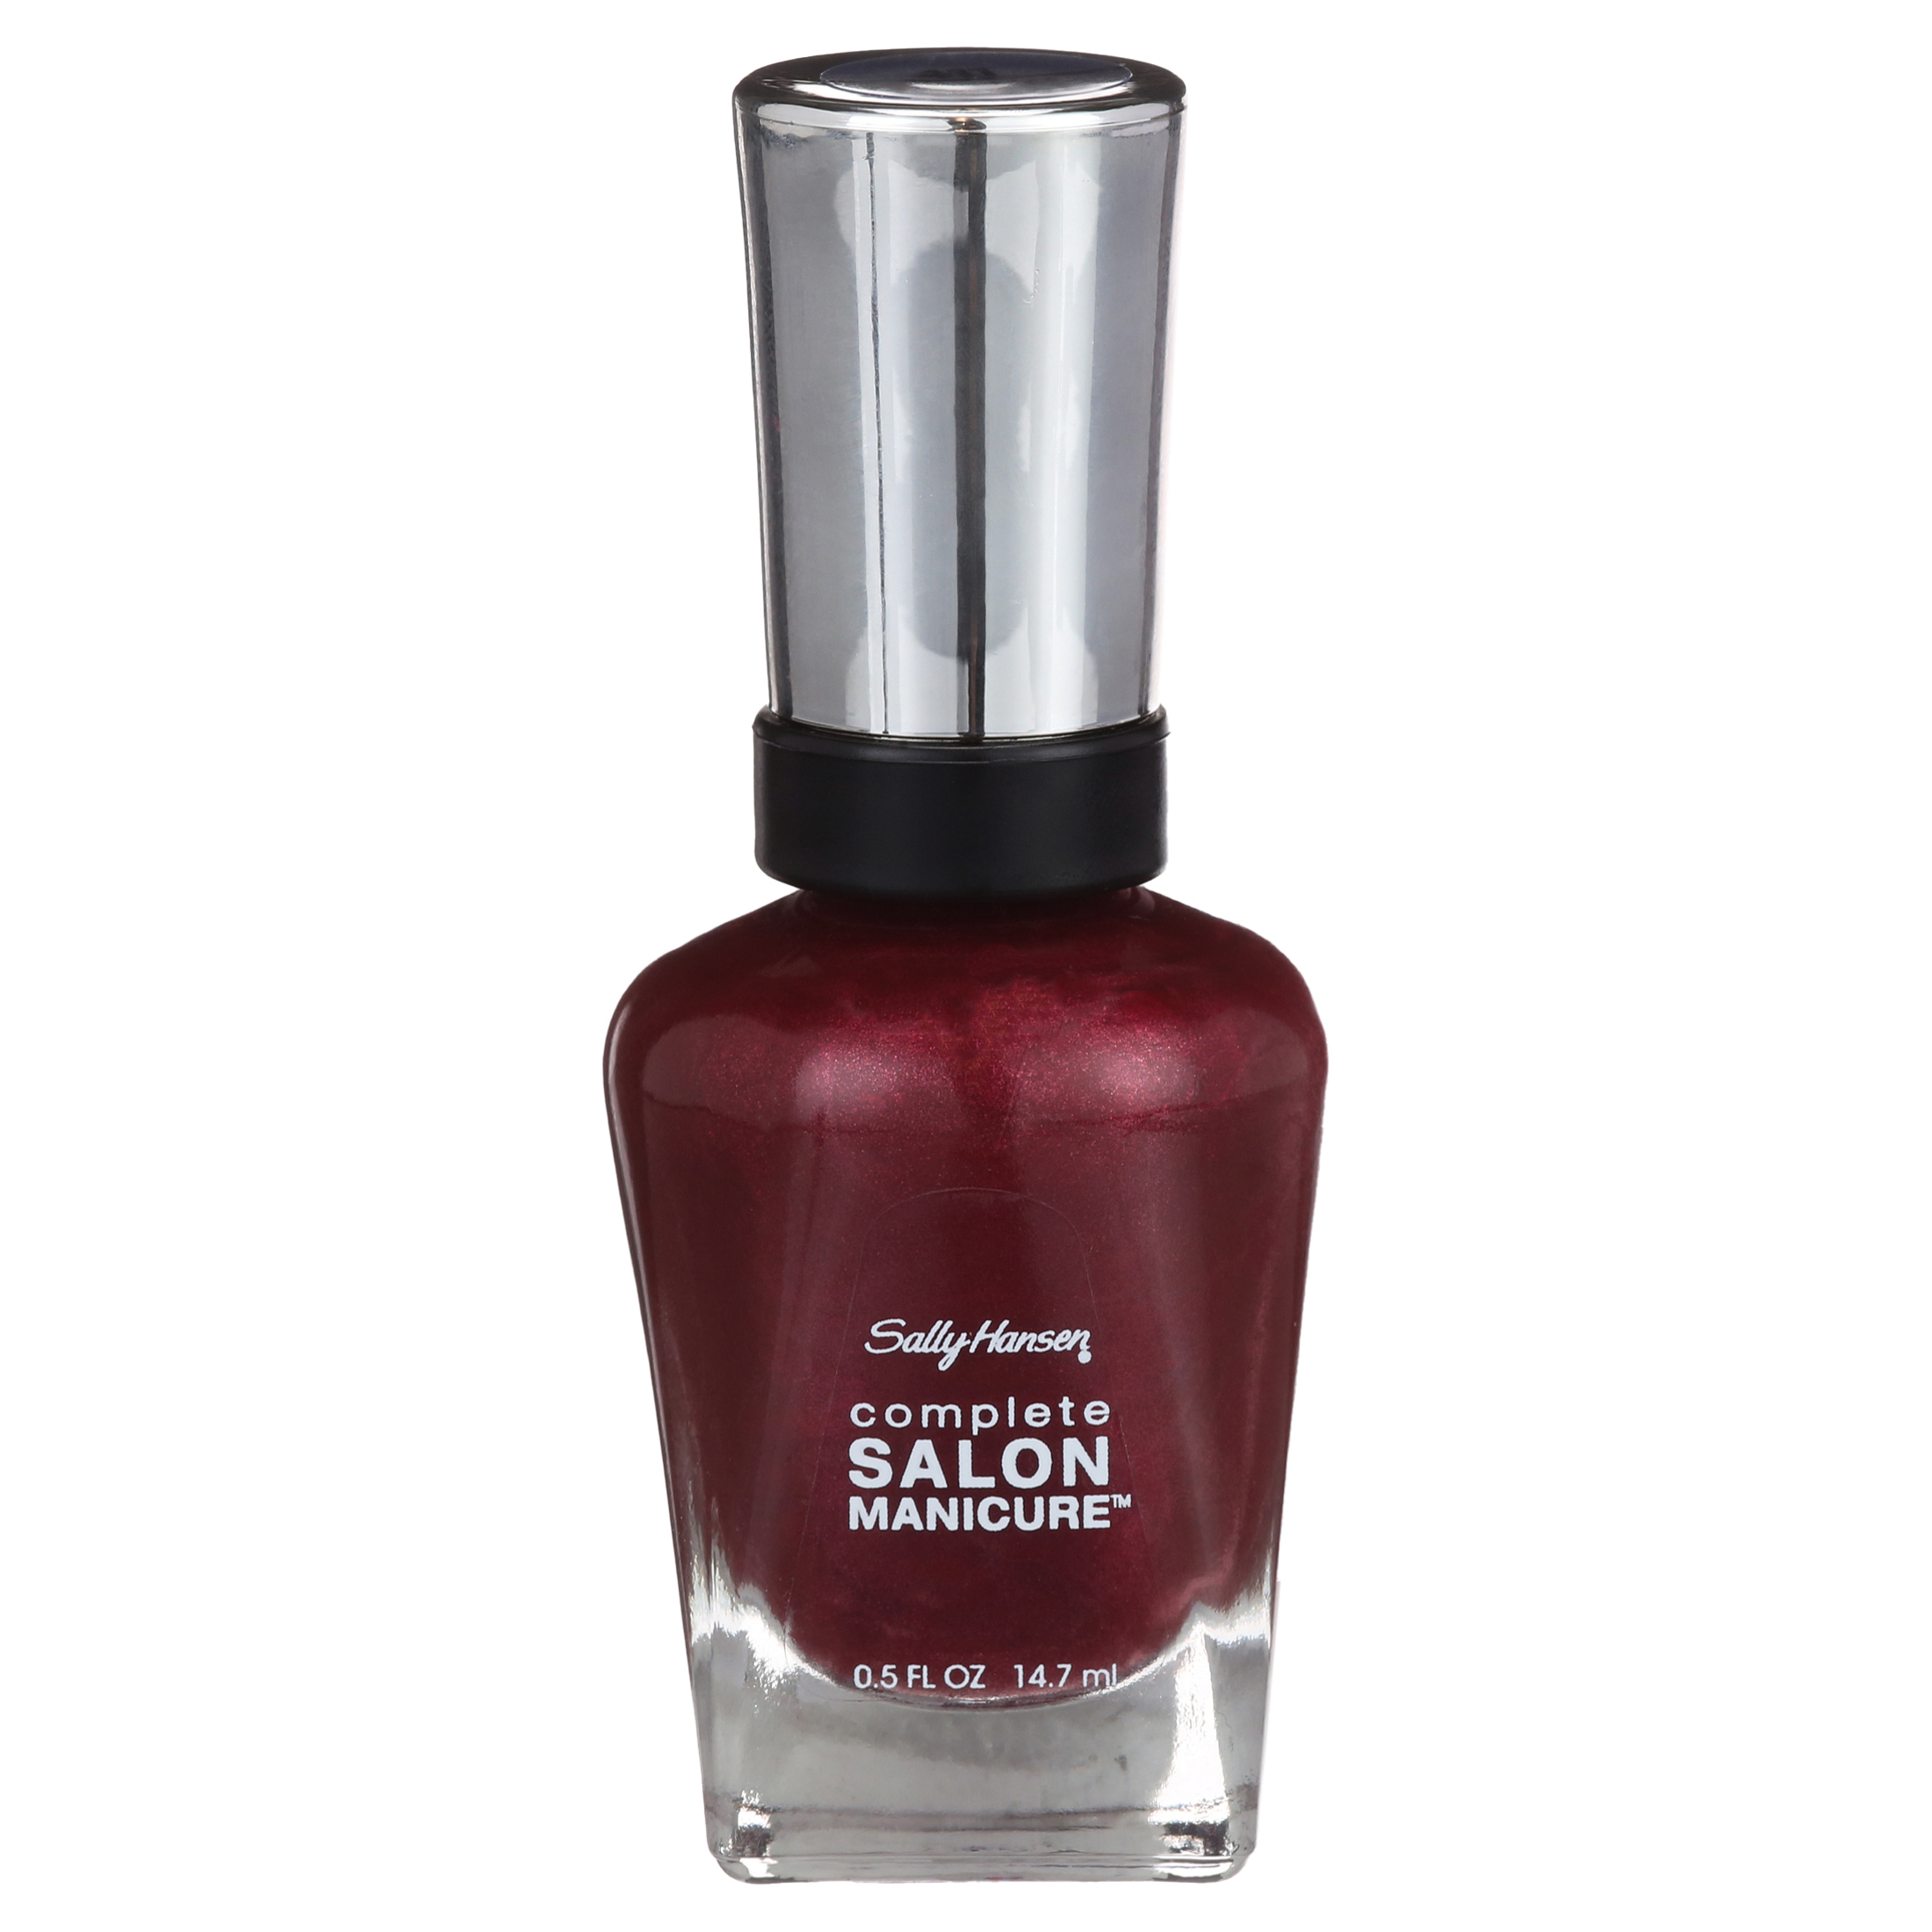 Sally Hansen Complete Salon Manicure Nail Color, Wine Not - image 6 of 8